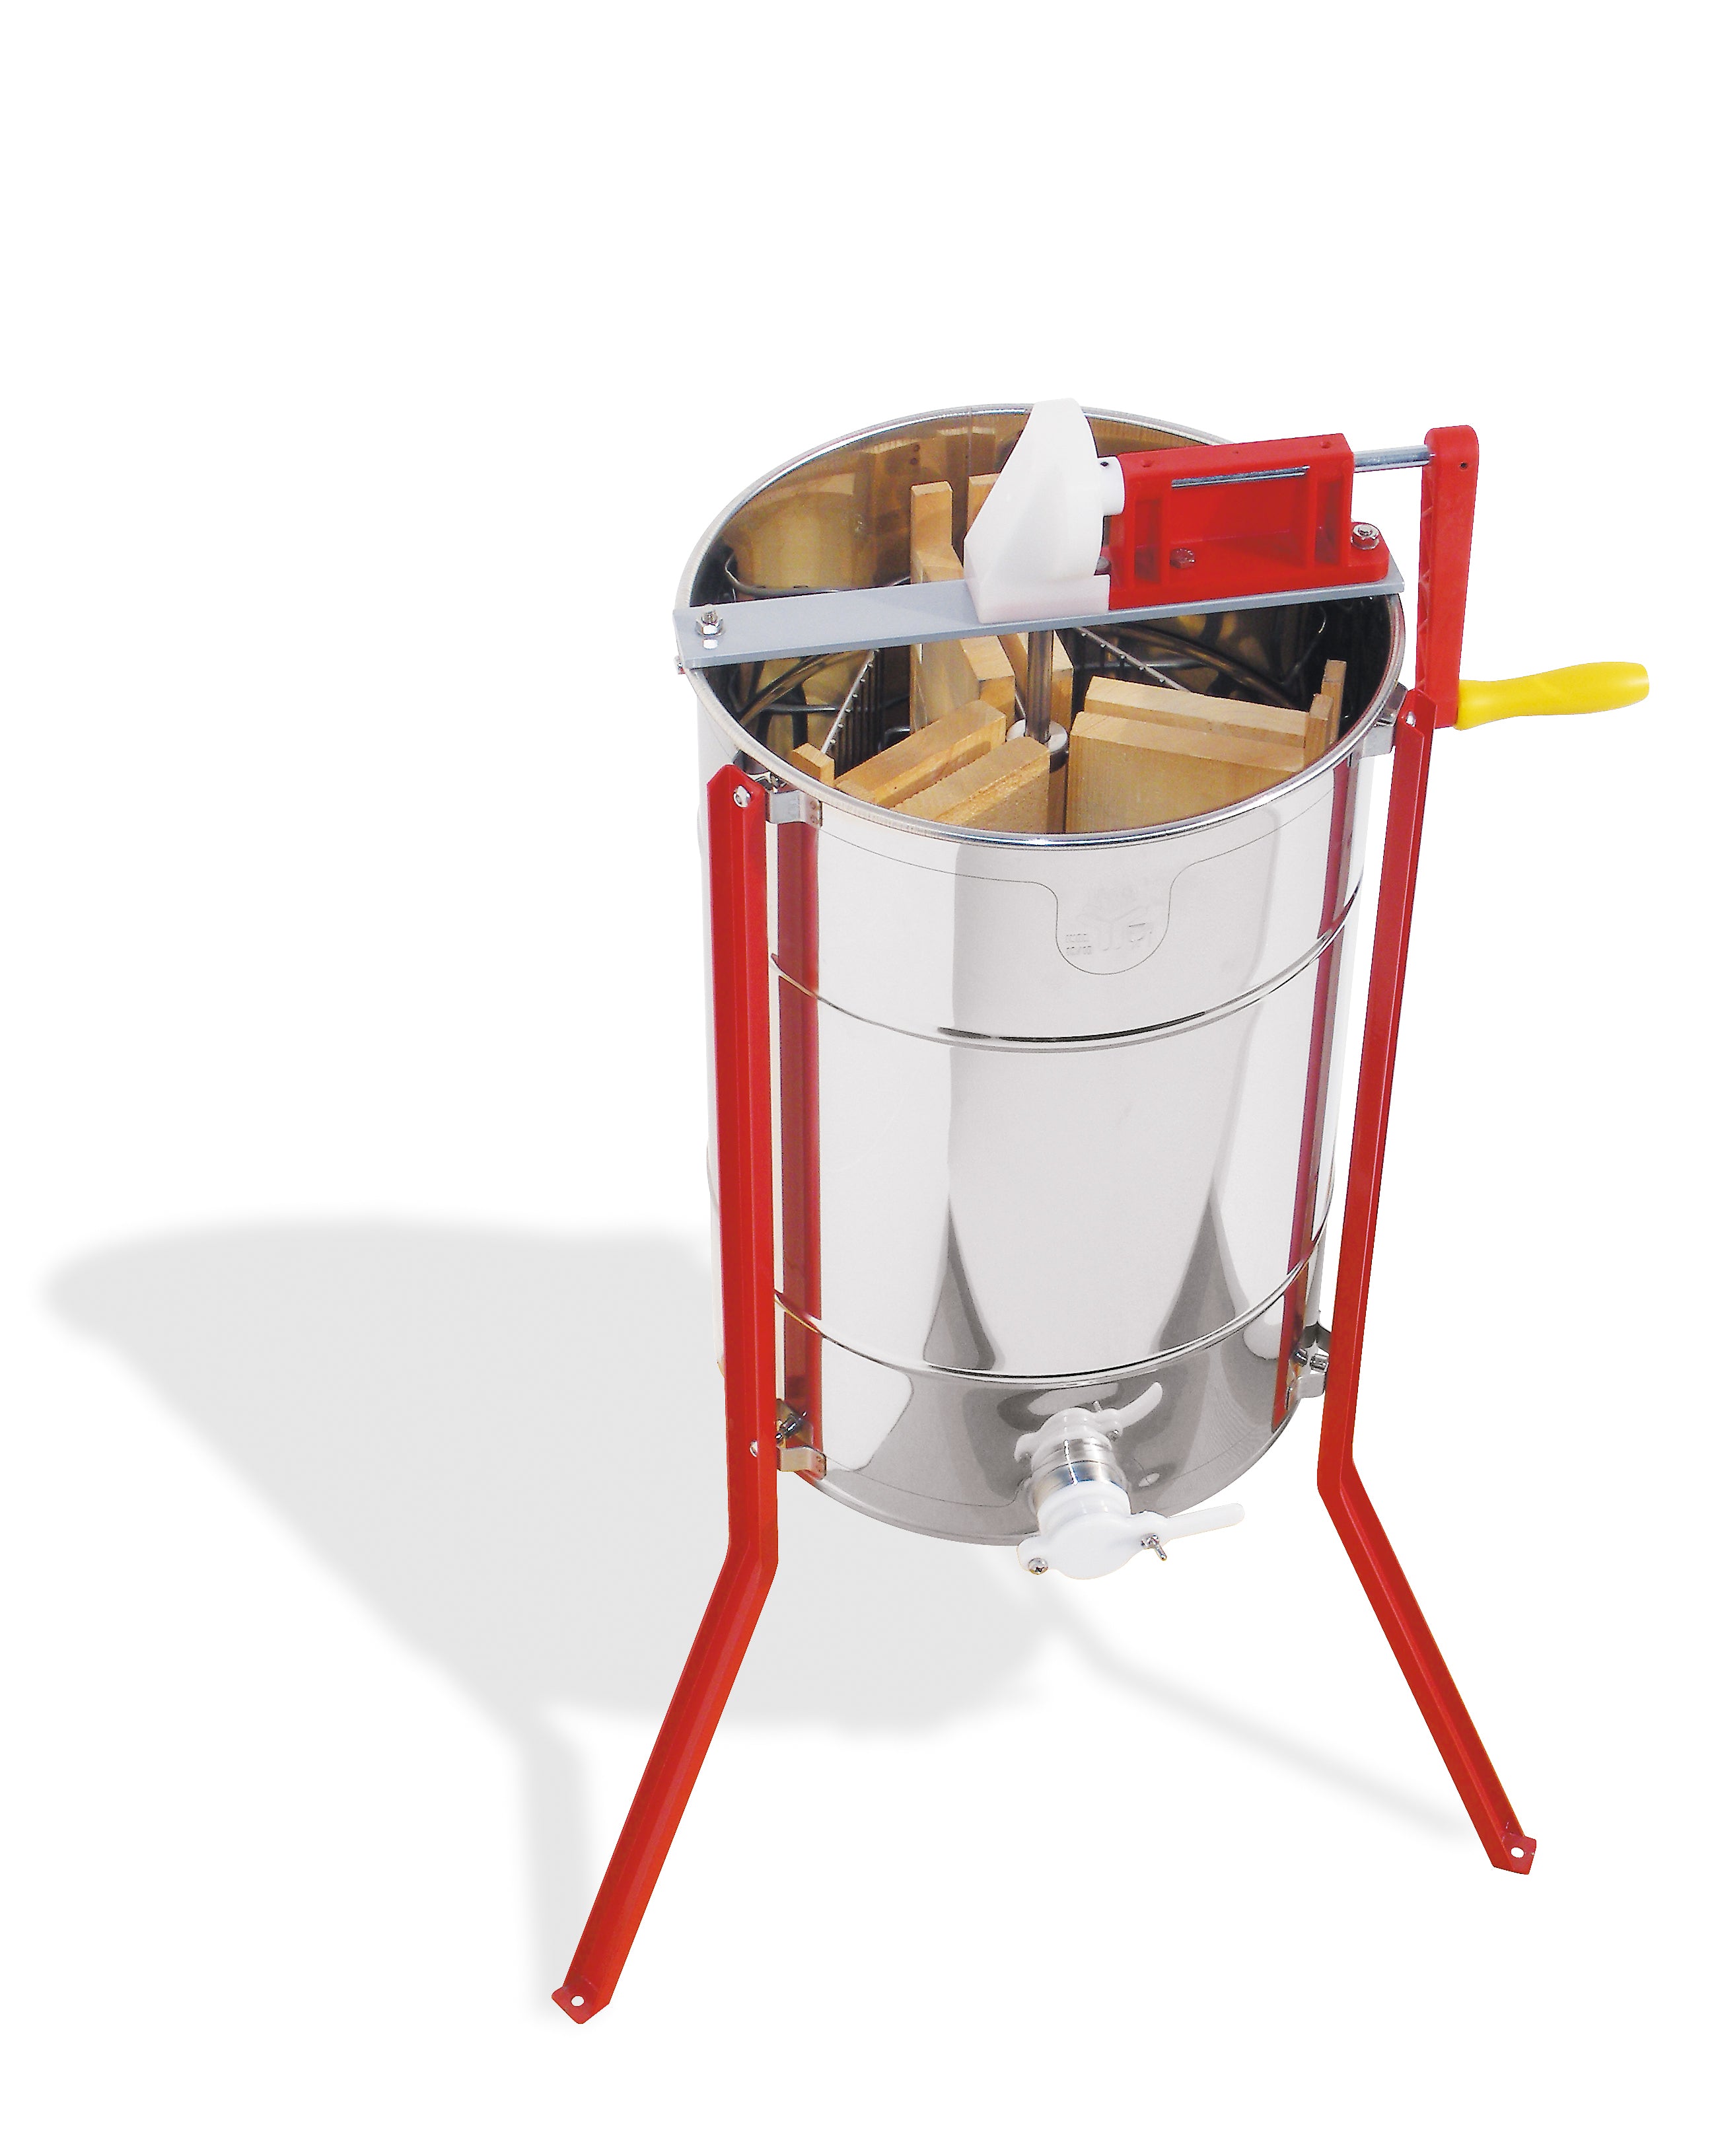 An image of 6 Frame Manual Stainless Steel Extractor